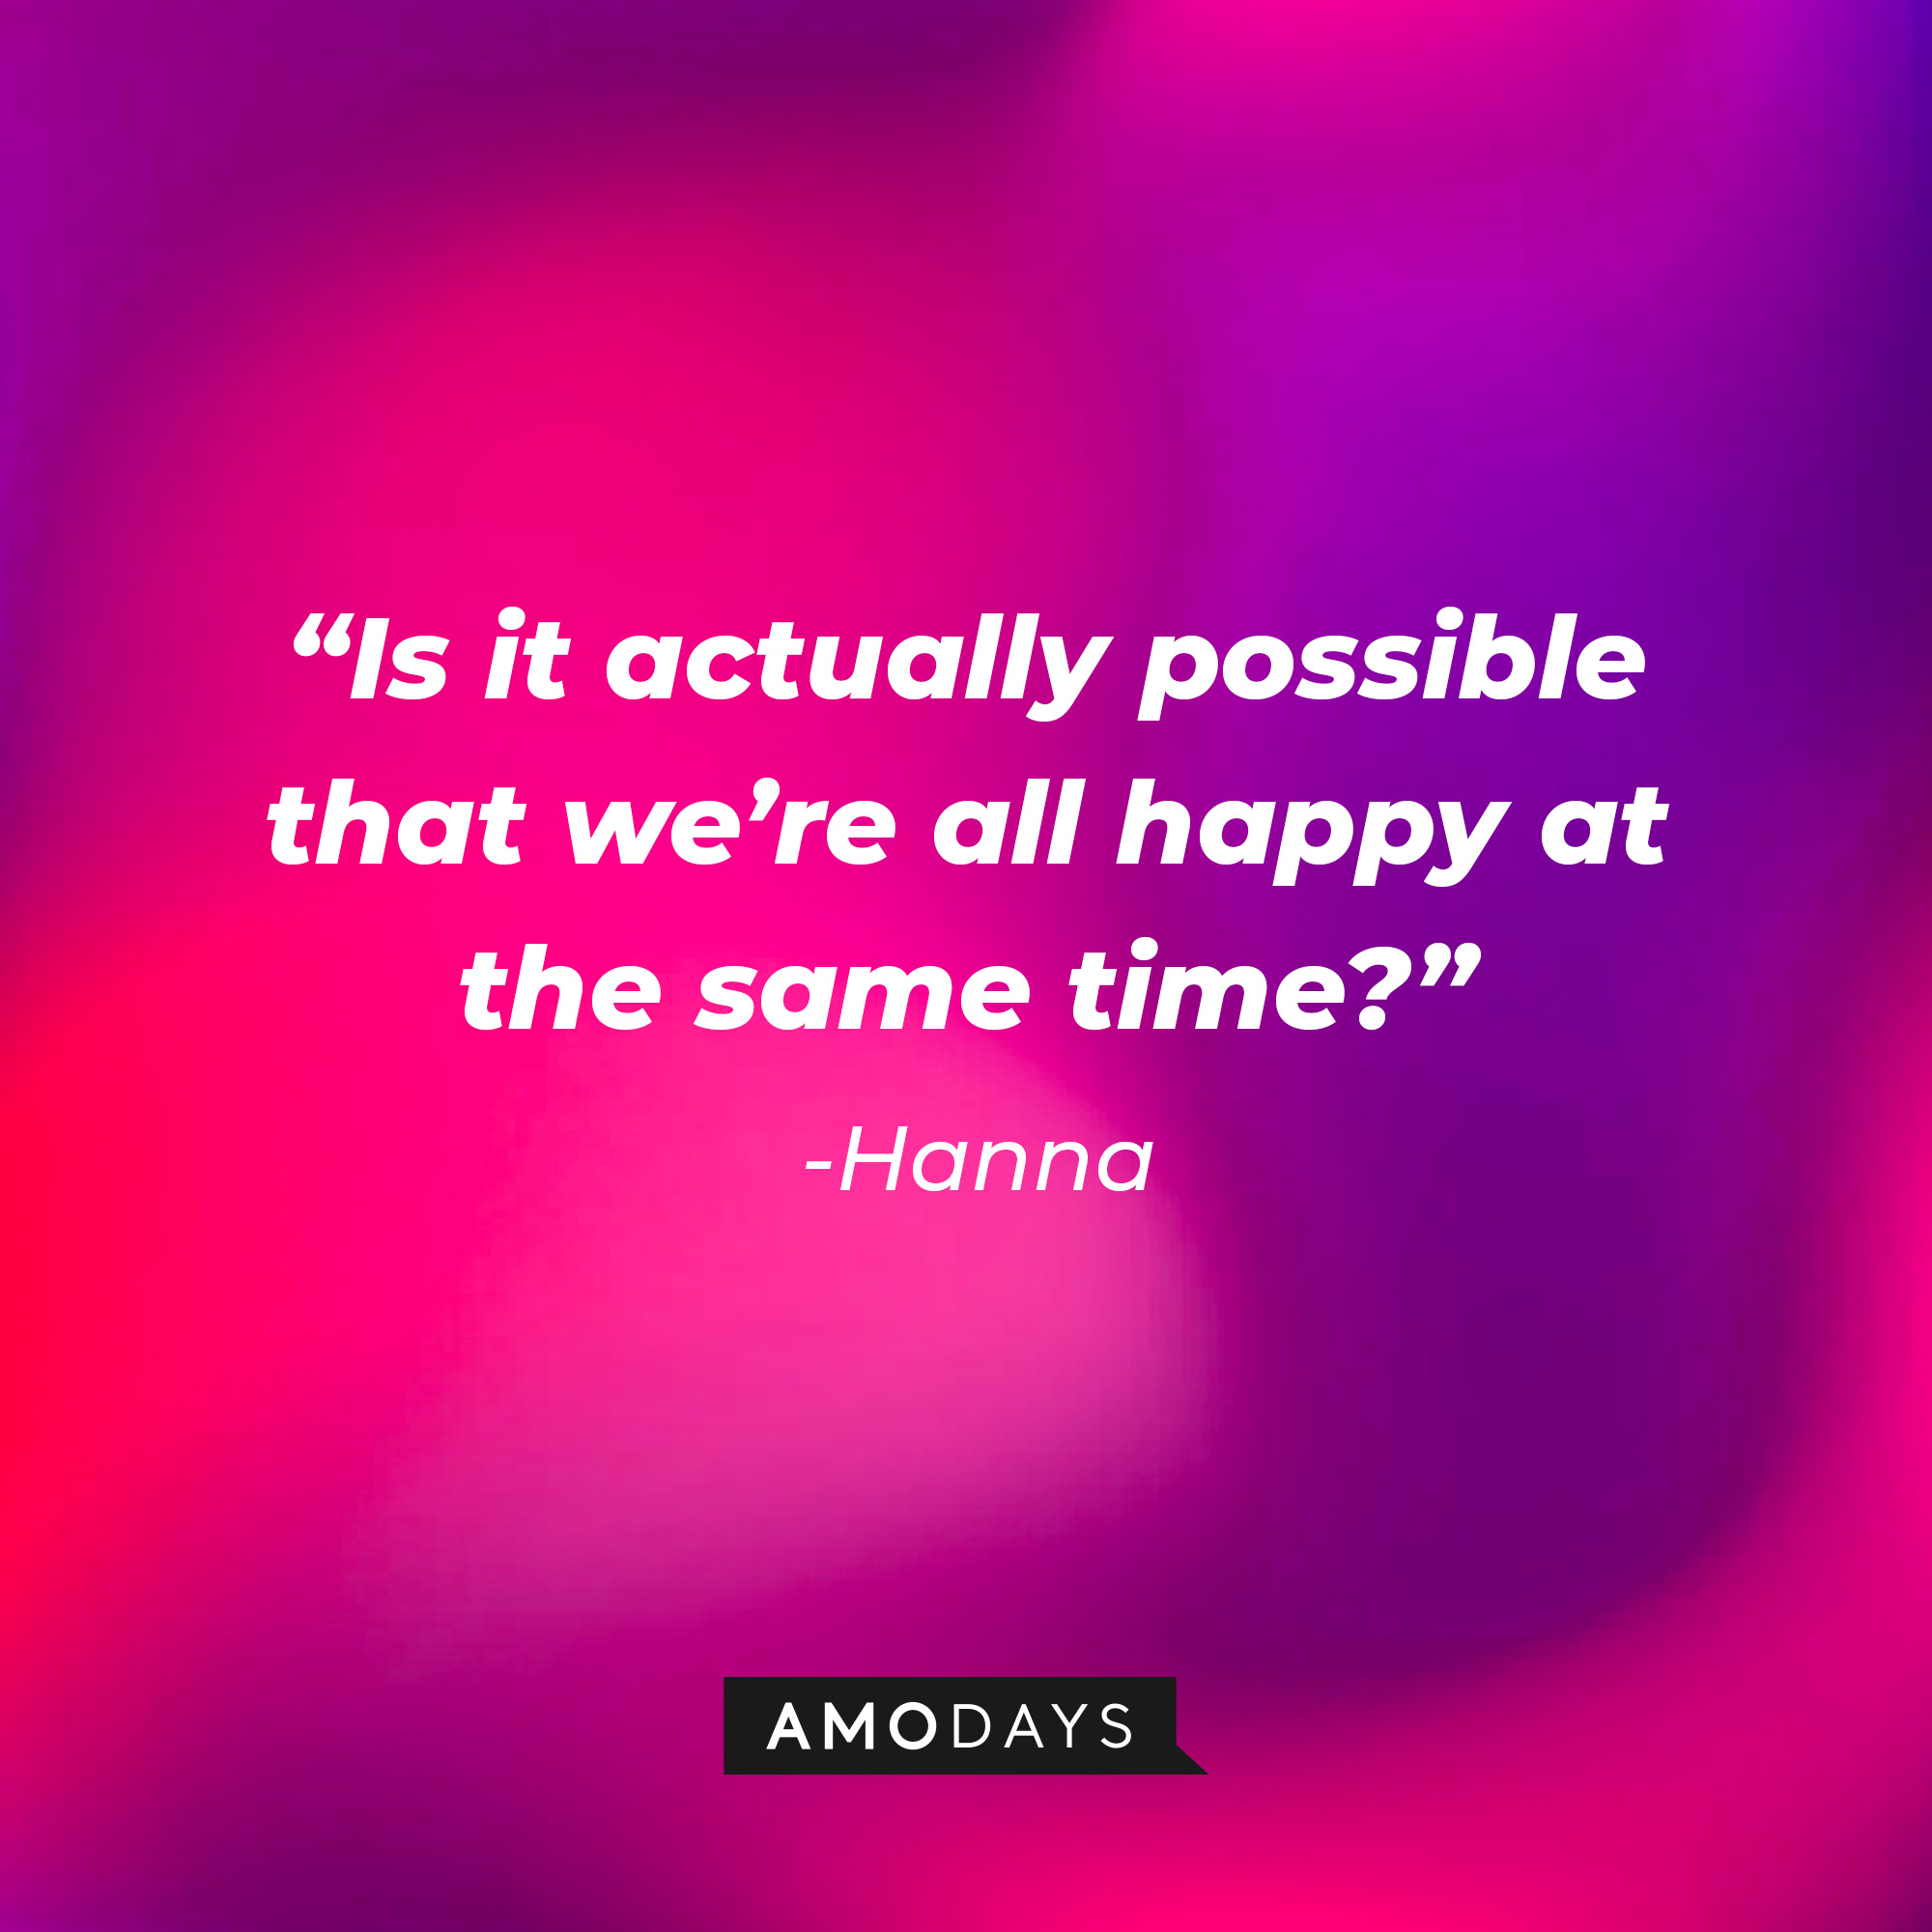 Hanna's quote: "Is it actually possible that we're all happy at the same time?" | Source: Amodays